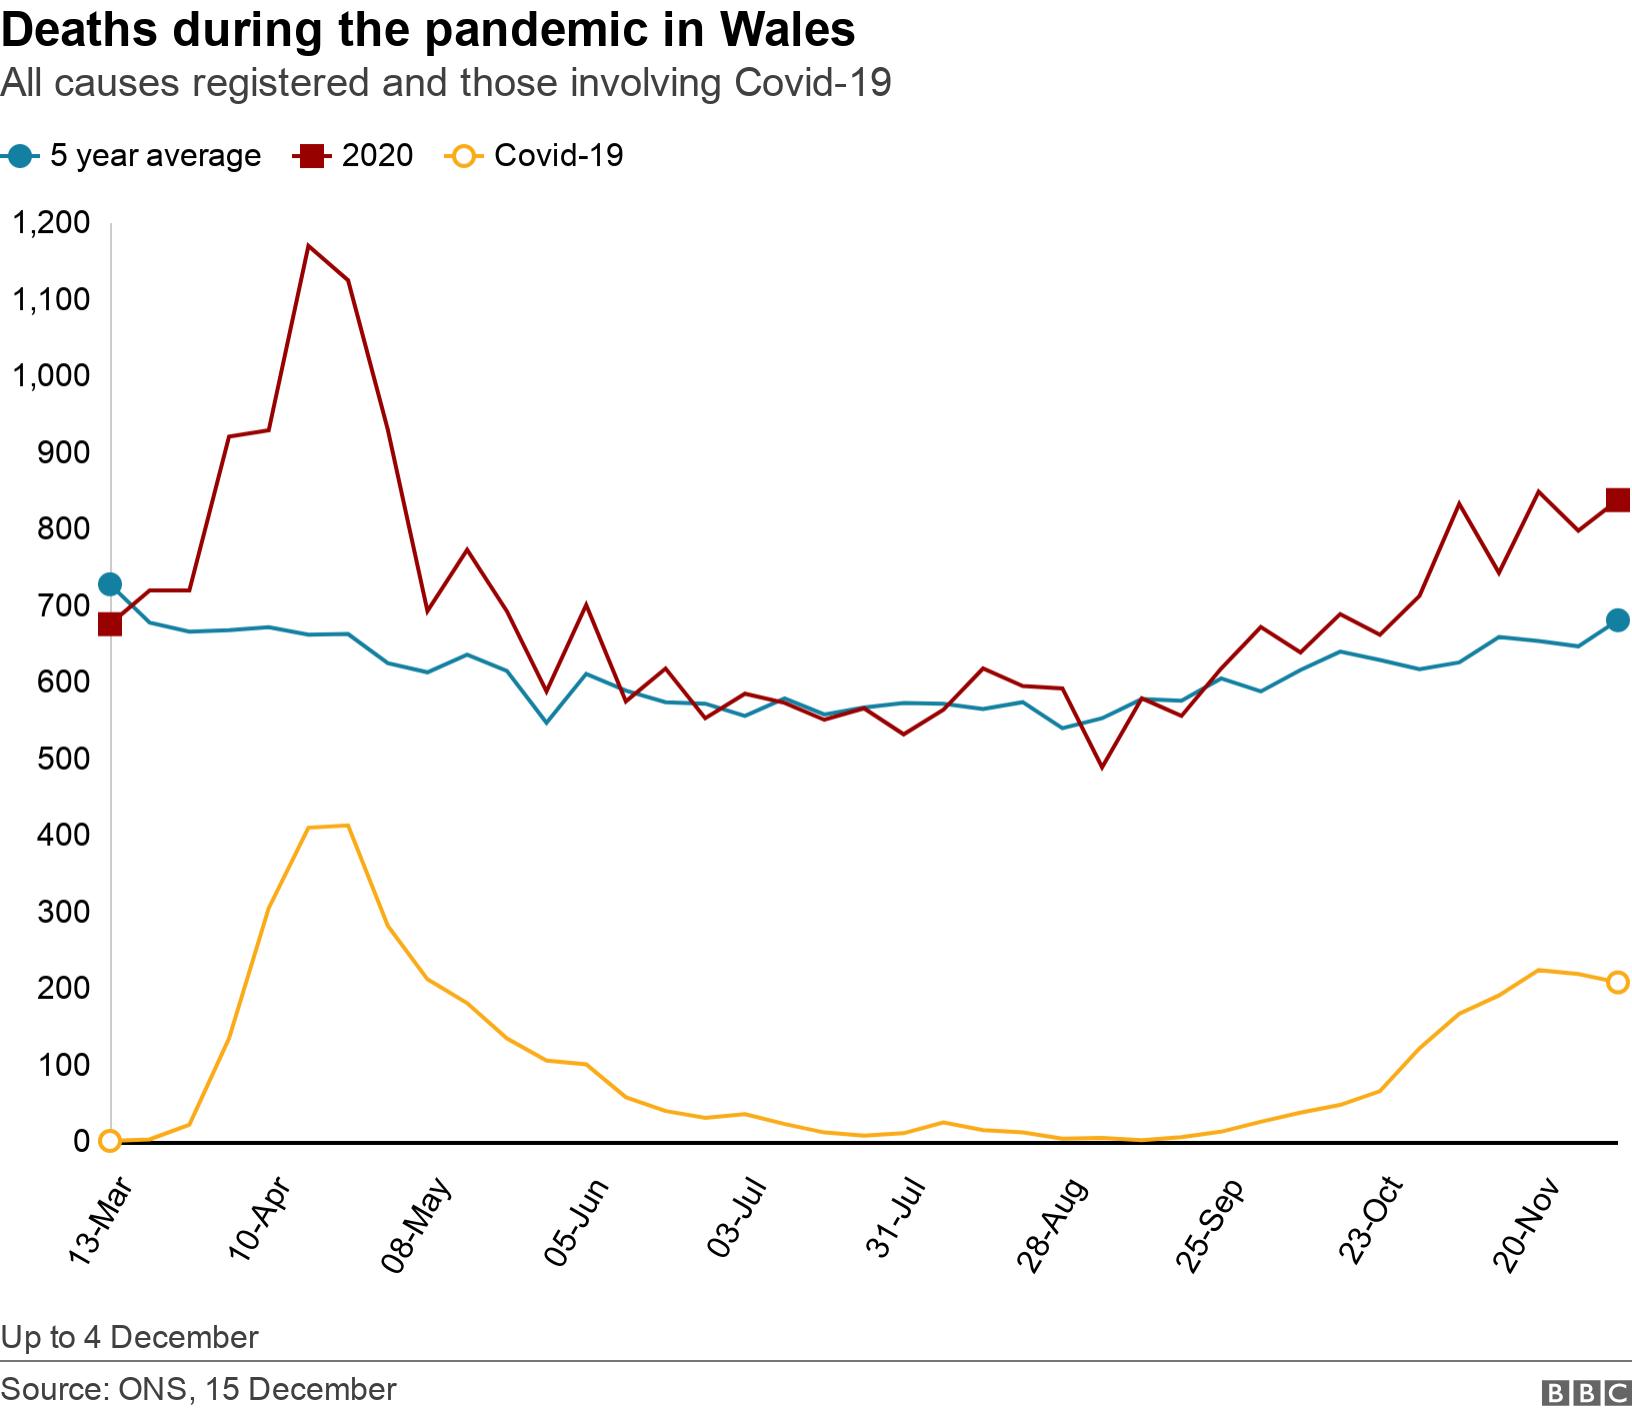 Deaths during the pandemic in Wales. All causes registered and those involving Covid-19. Up to 4 December.